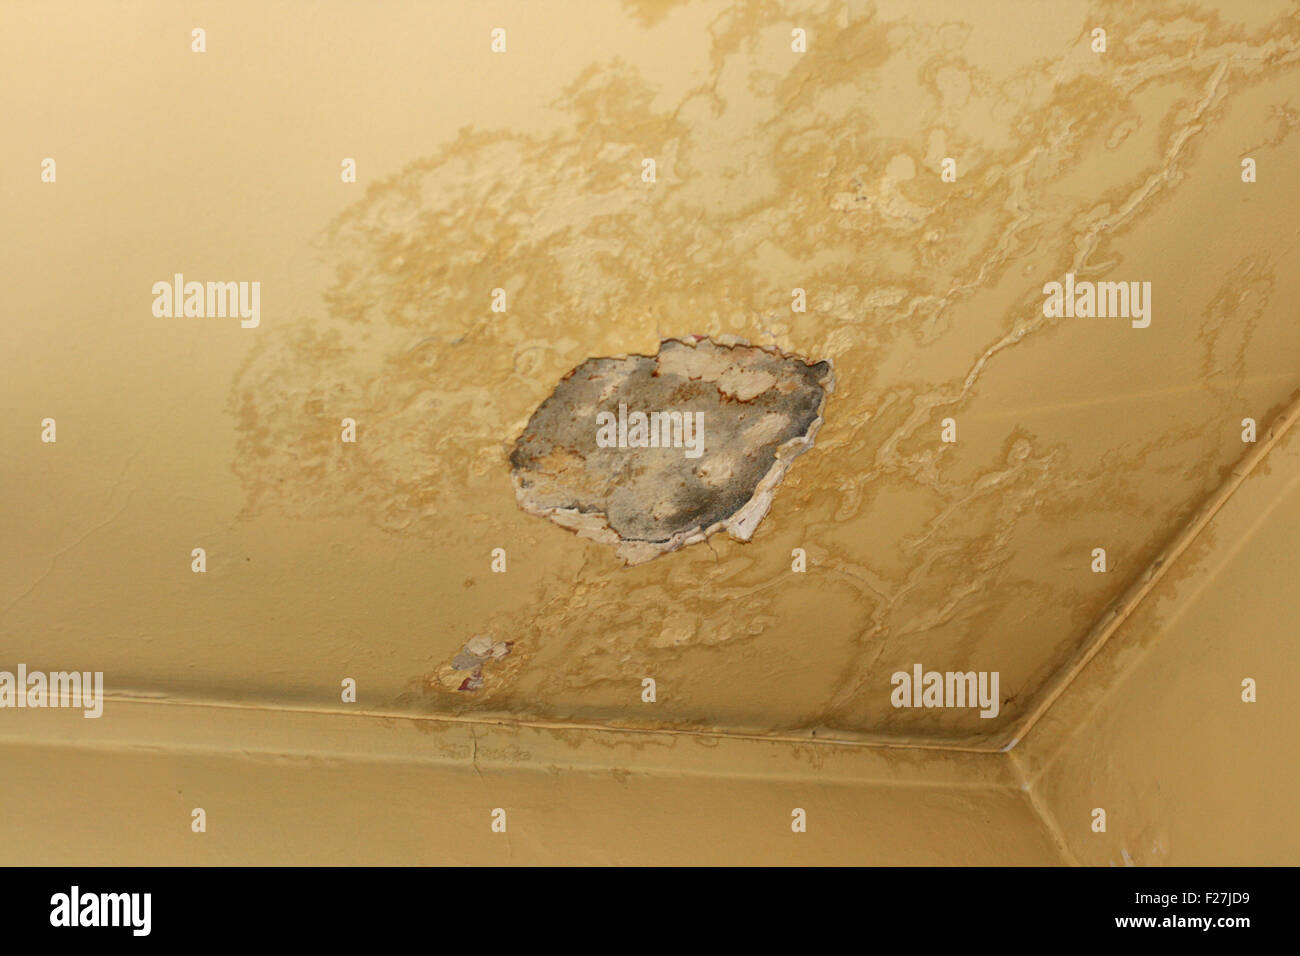 Crack In The Ceiling Of An Old House Stock Photo 87449301 Alamy